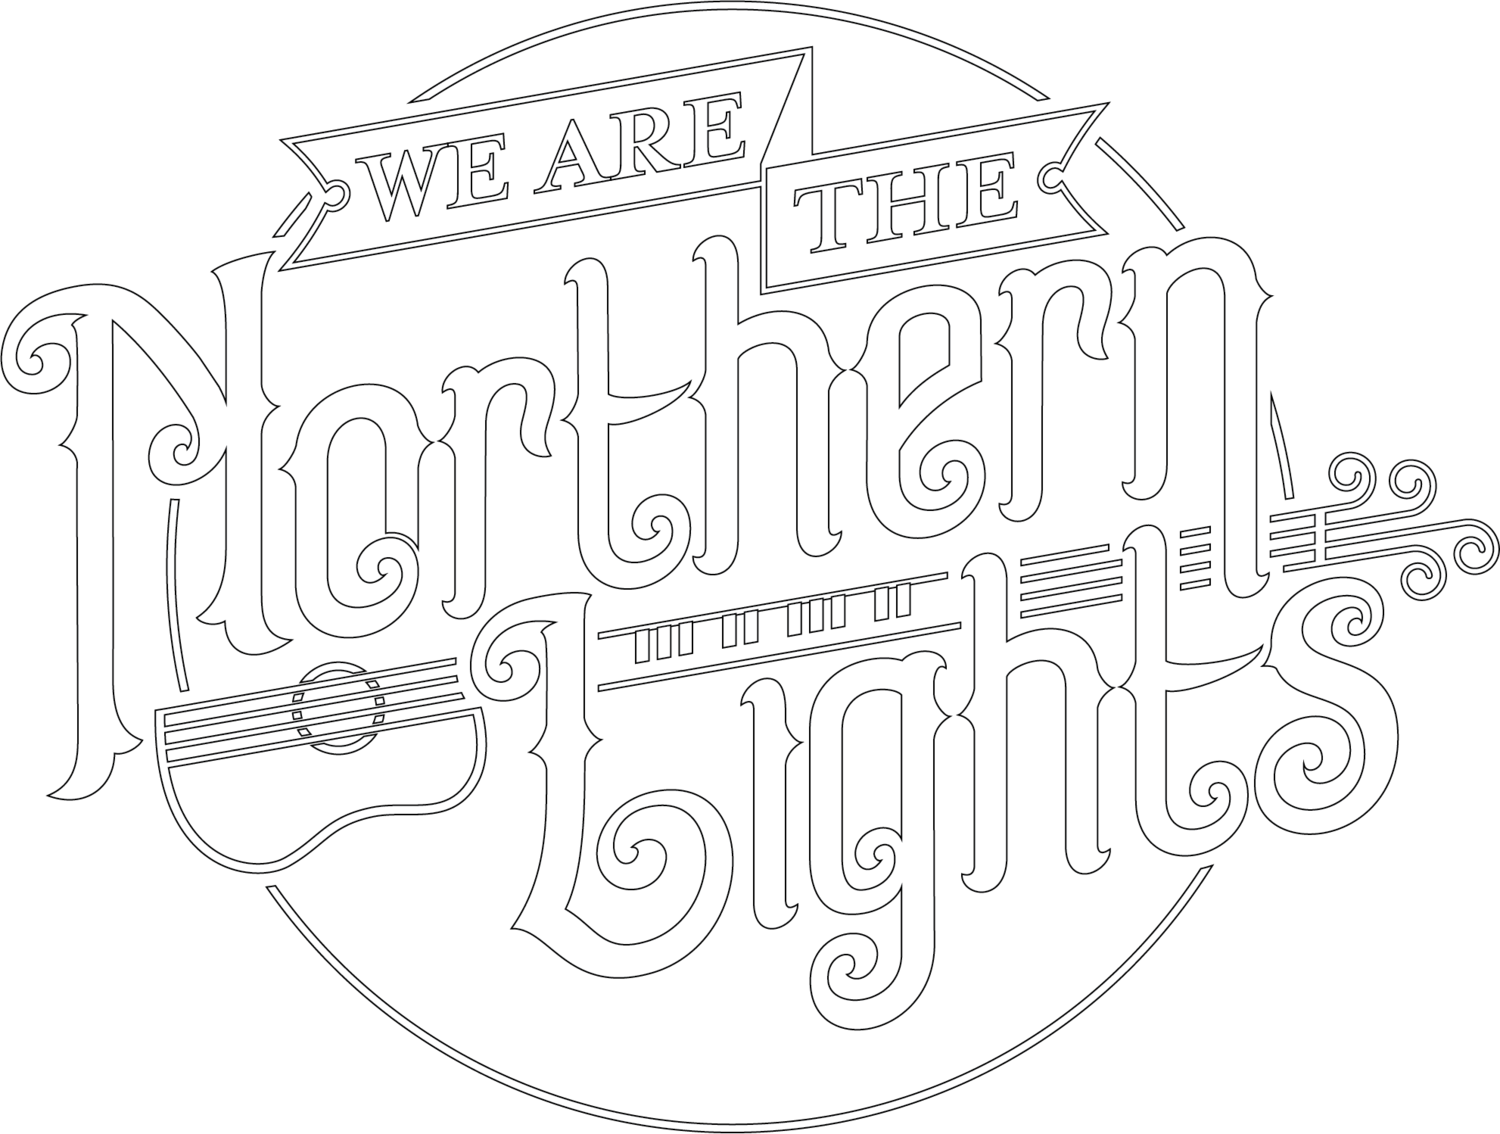 We Are The Northern Lights